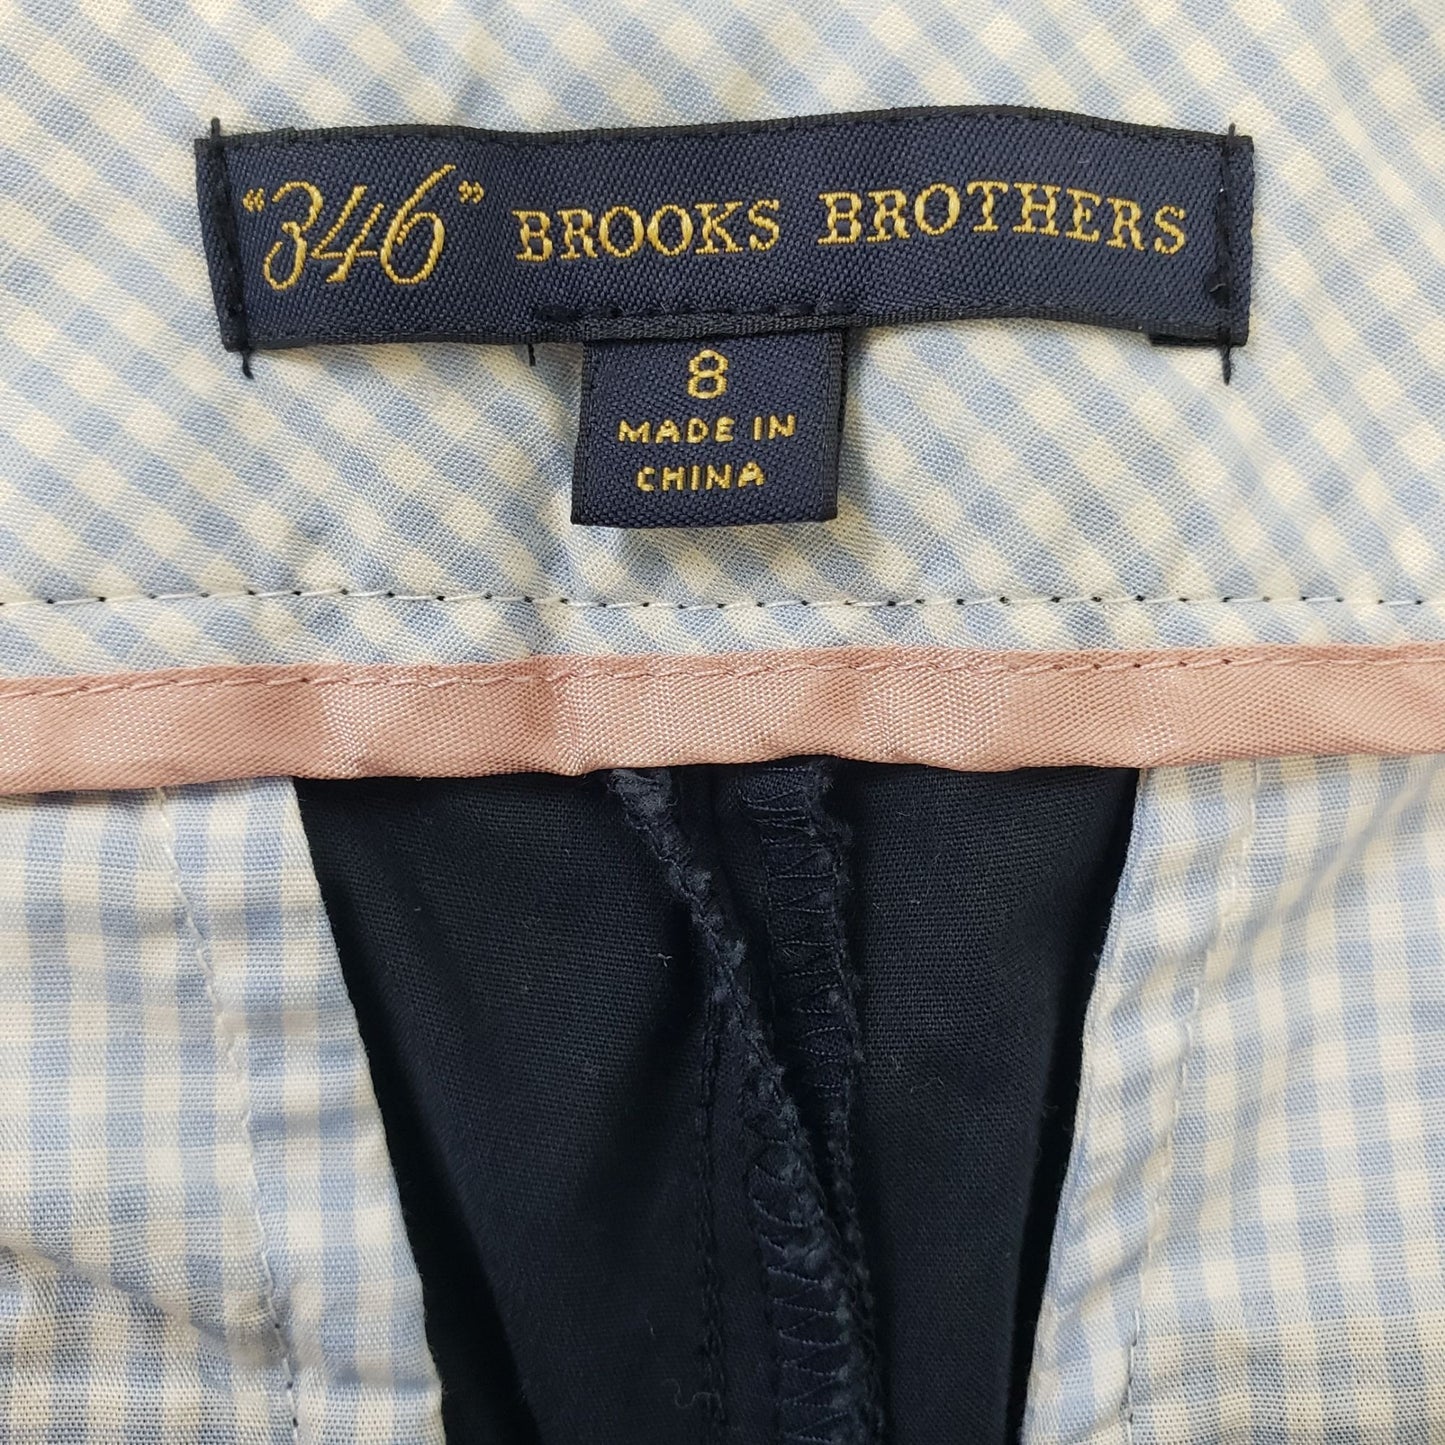 Brooks Brothers "346" Embroidered Whale Print Chino Shorts Size 8